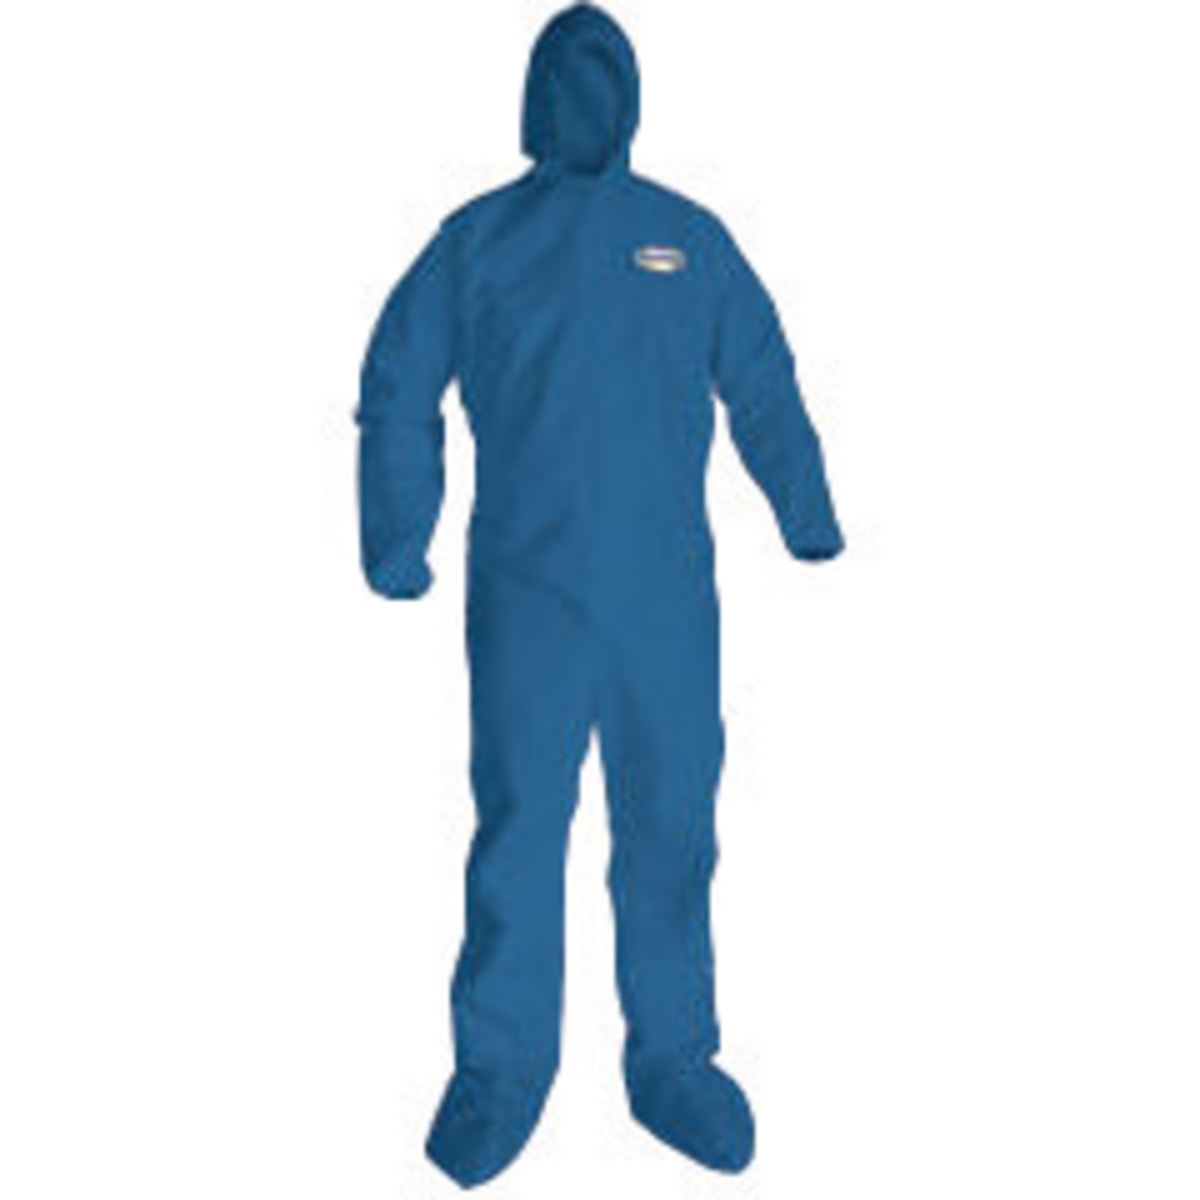 Kimberly-Clark Professional™ Medium Blue KleenGuard™ A20 SMMMS Disposable Coveralls (Availability restrictions apply.)